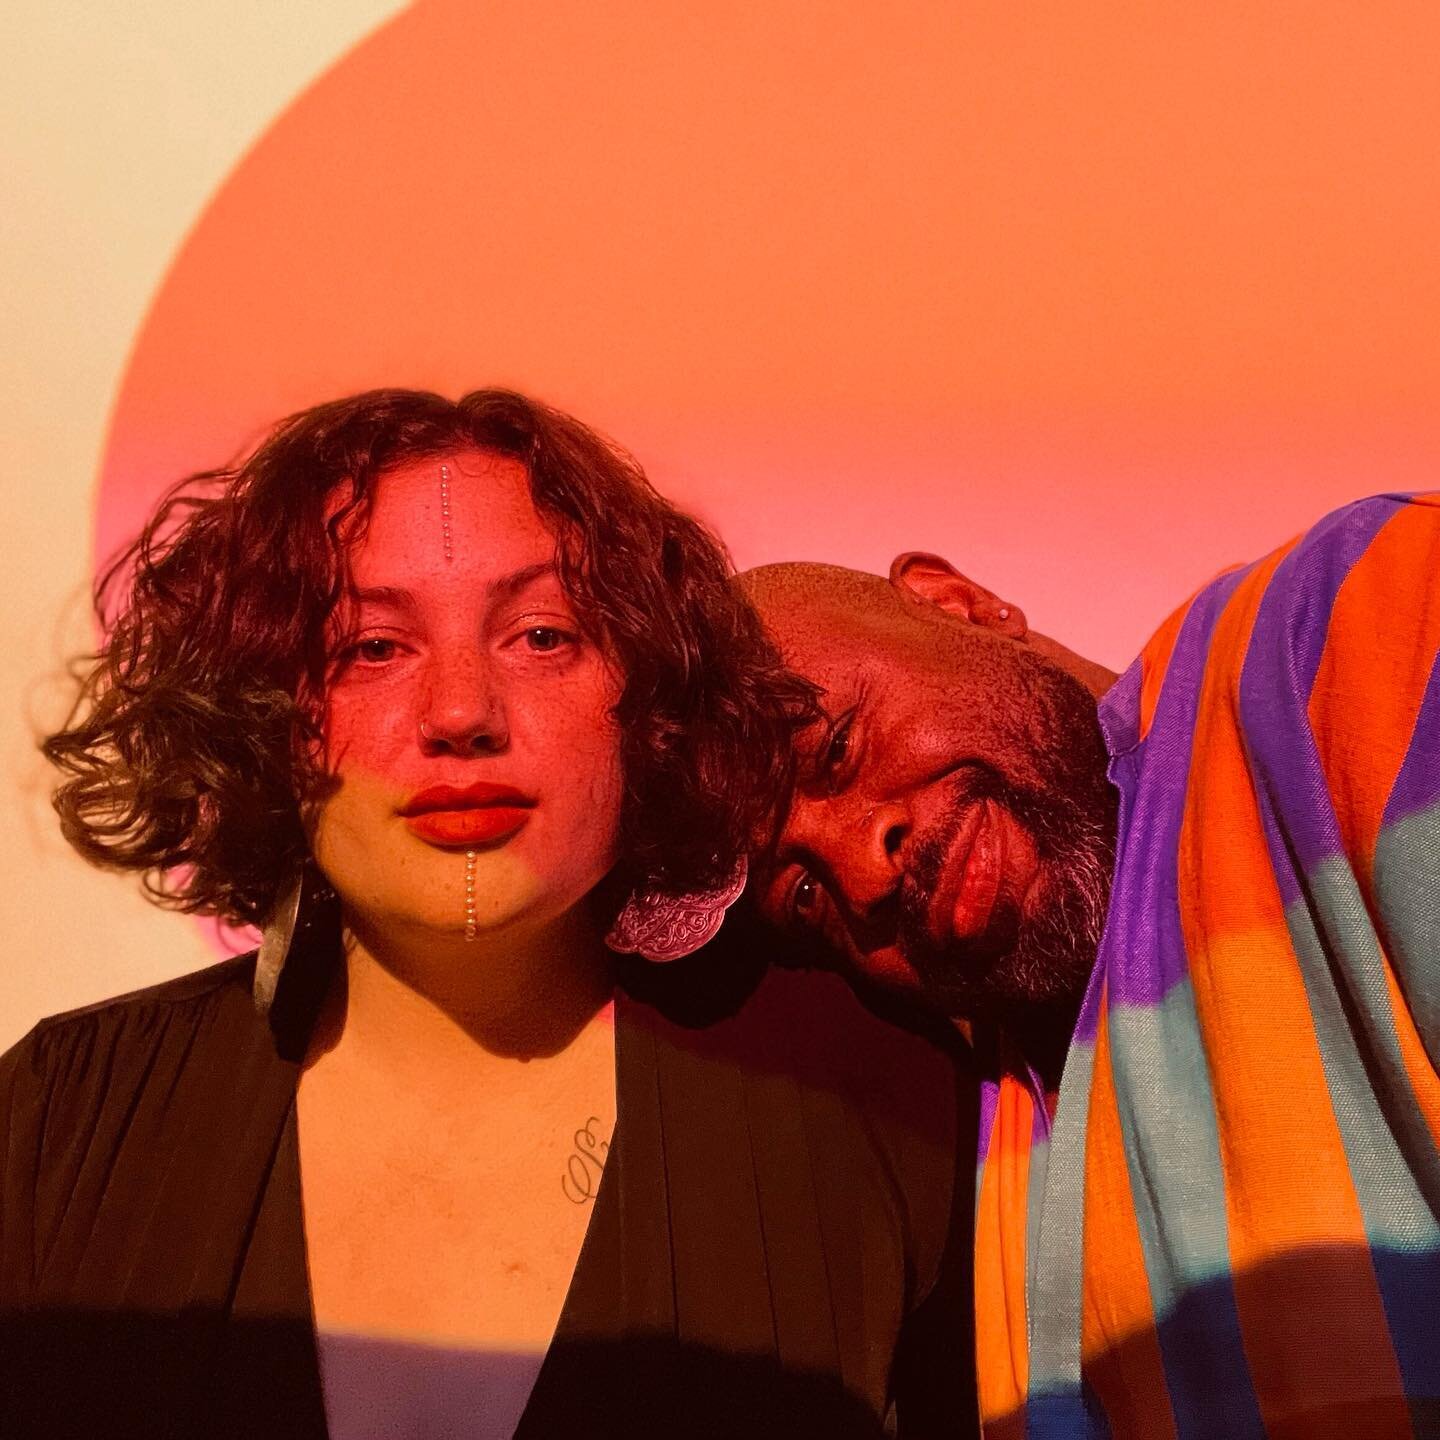 🎶 Join AQUIN for their debut performance this Saturday! A new project from Genoa Brown &amp; Jase Earl. Both experienced vocalists &amp; instrumentalists, AQUIN highlights their multi instrumental approach to soul and hip hop music.

Spring Art Mark